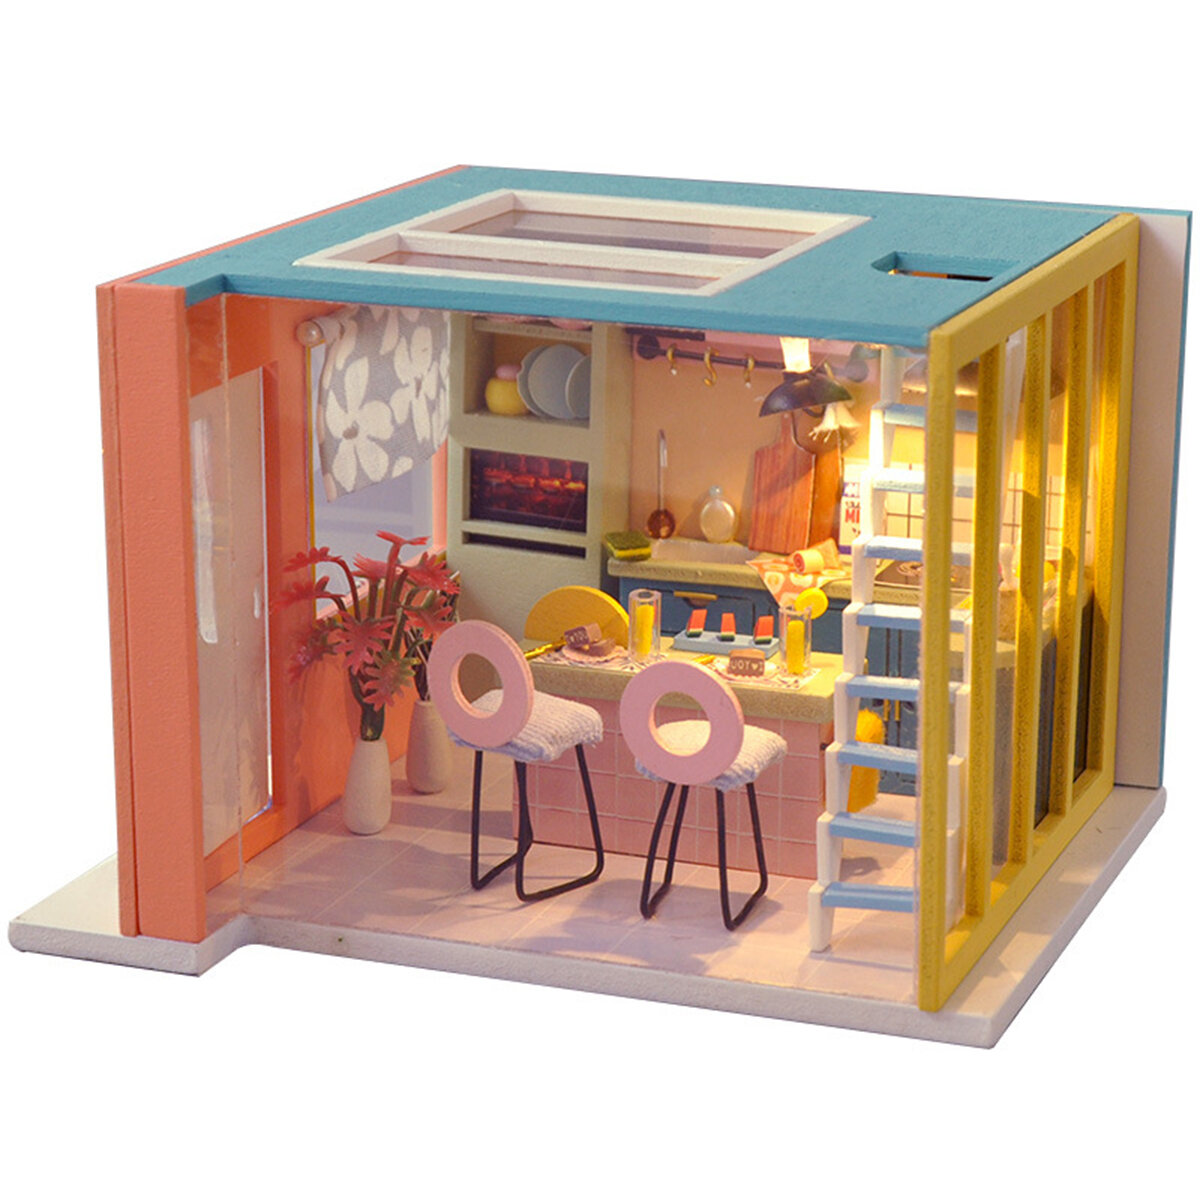 

Wooden Kitchen DIY Handmade Assemble Doll House Miniature Furniture Kit Education Toy with LED Light for Kids Gift Colle